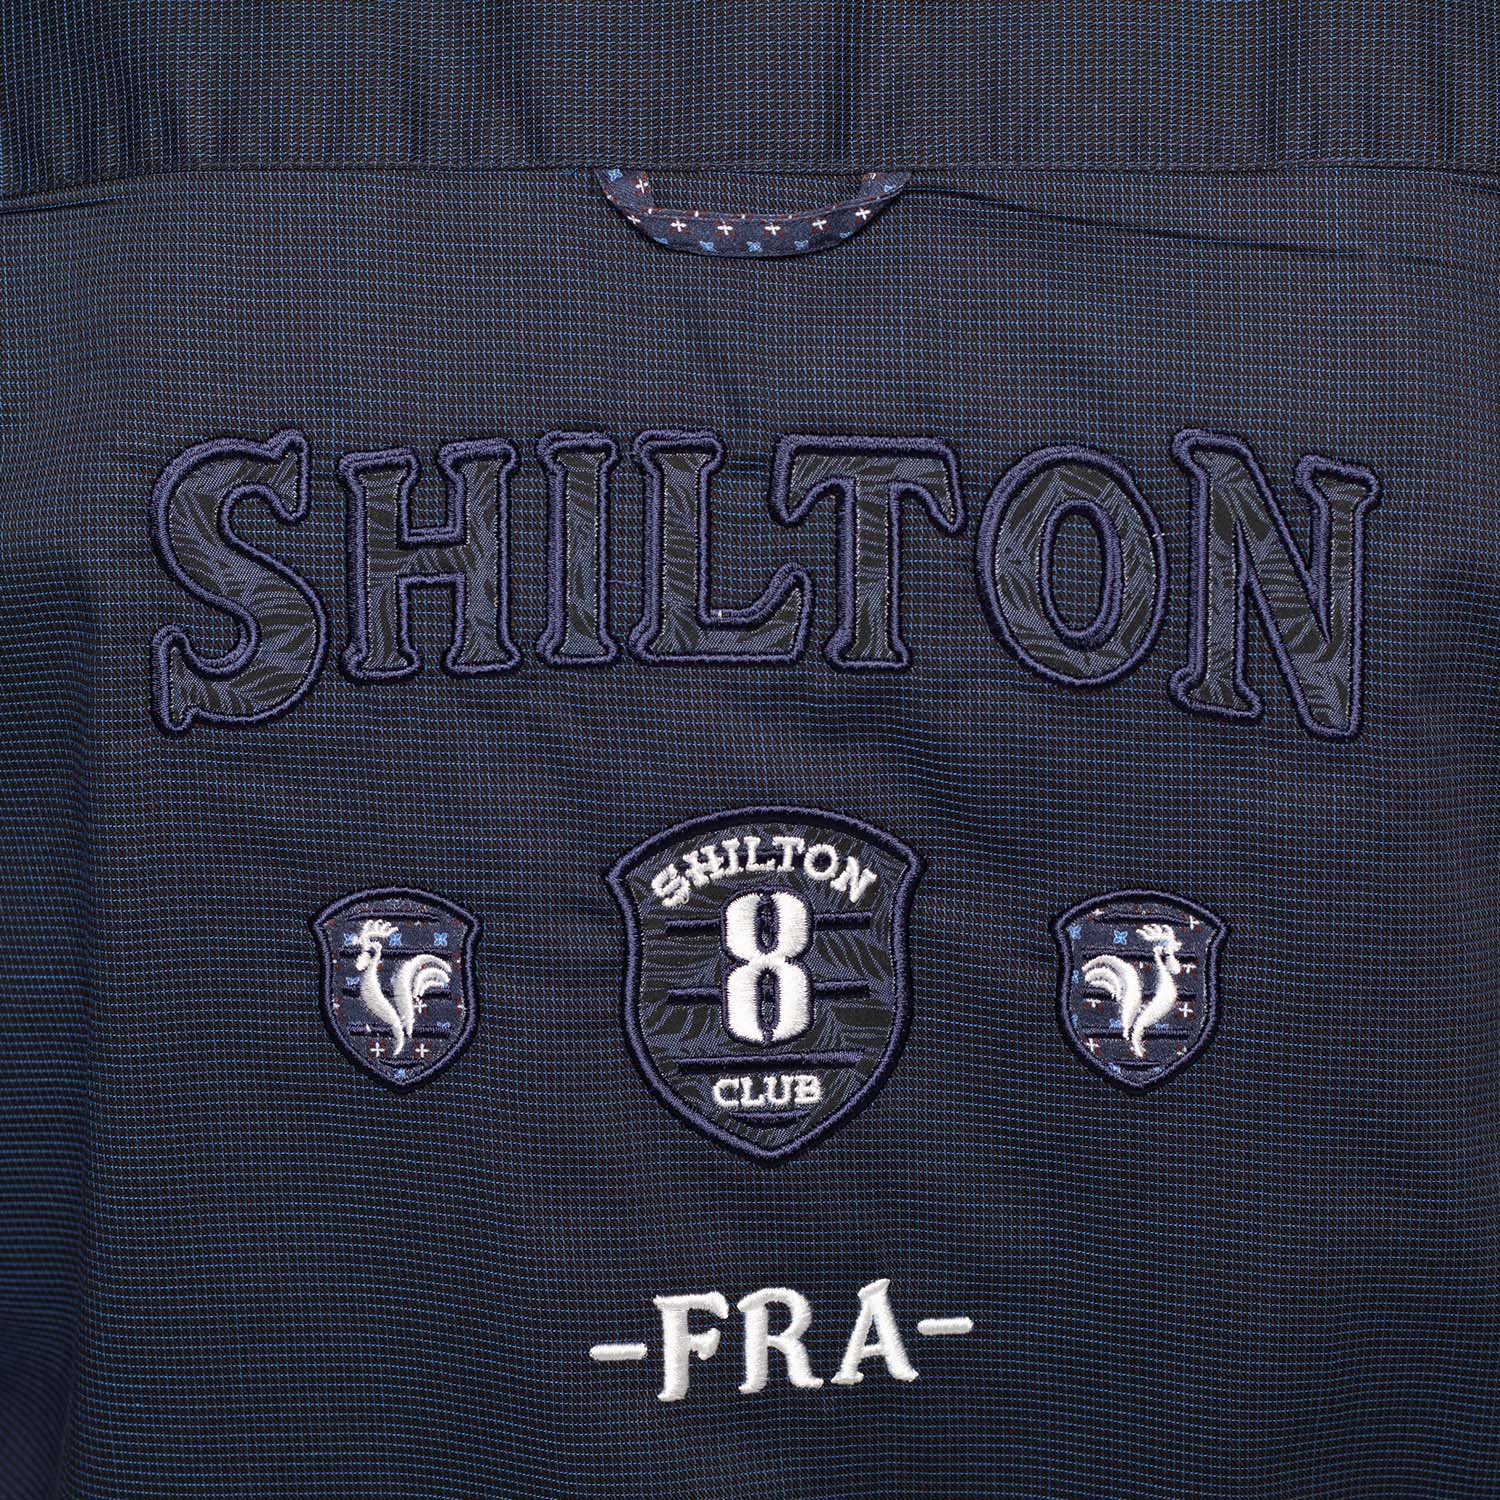 Chemise rugby france